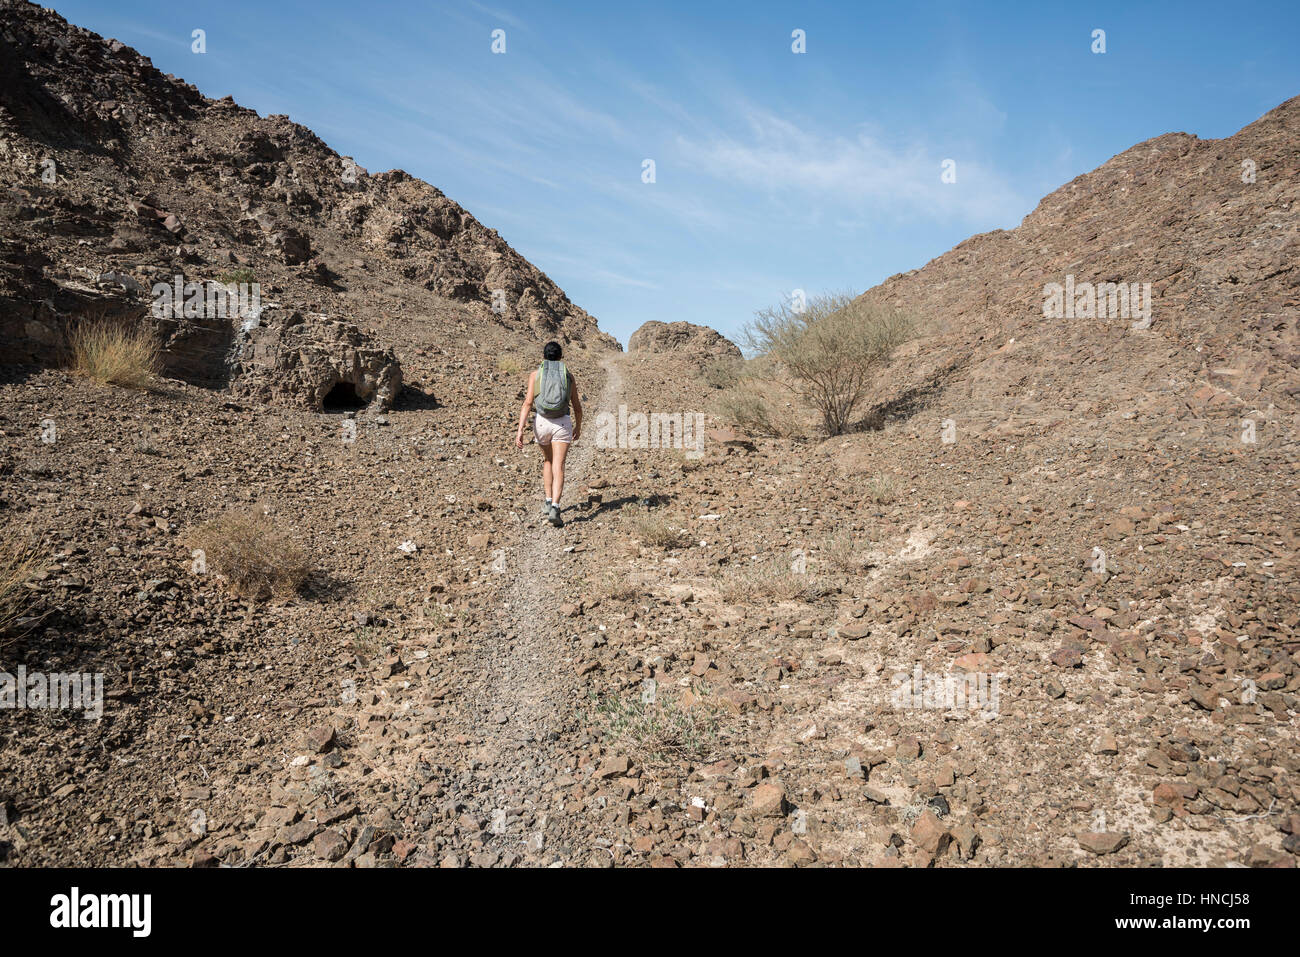 Woman trekking in a Wadi (Dry mountains) in the middle east Stock Photo